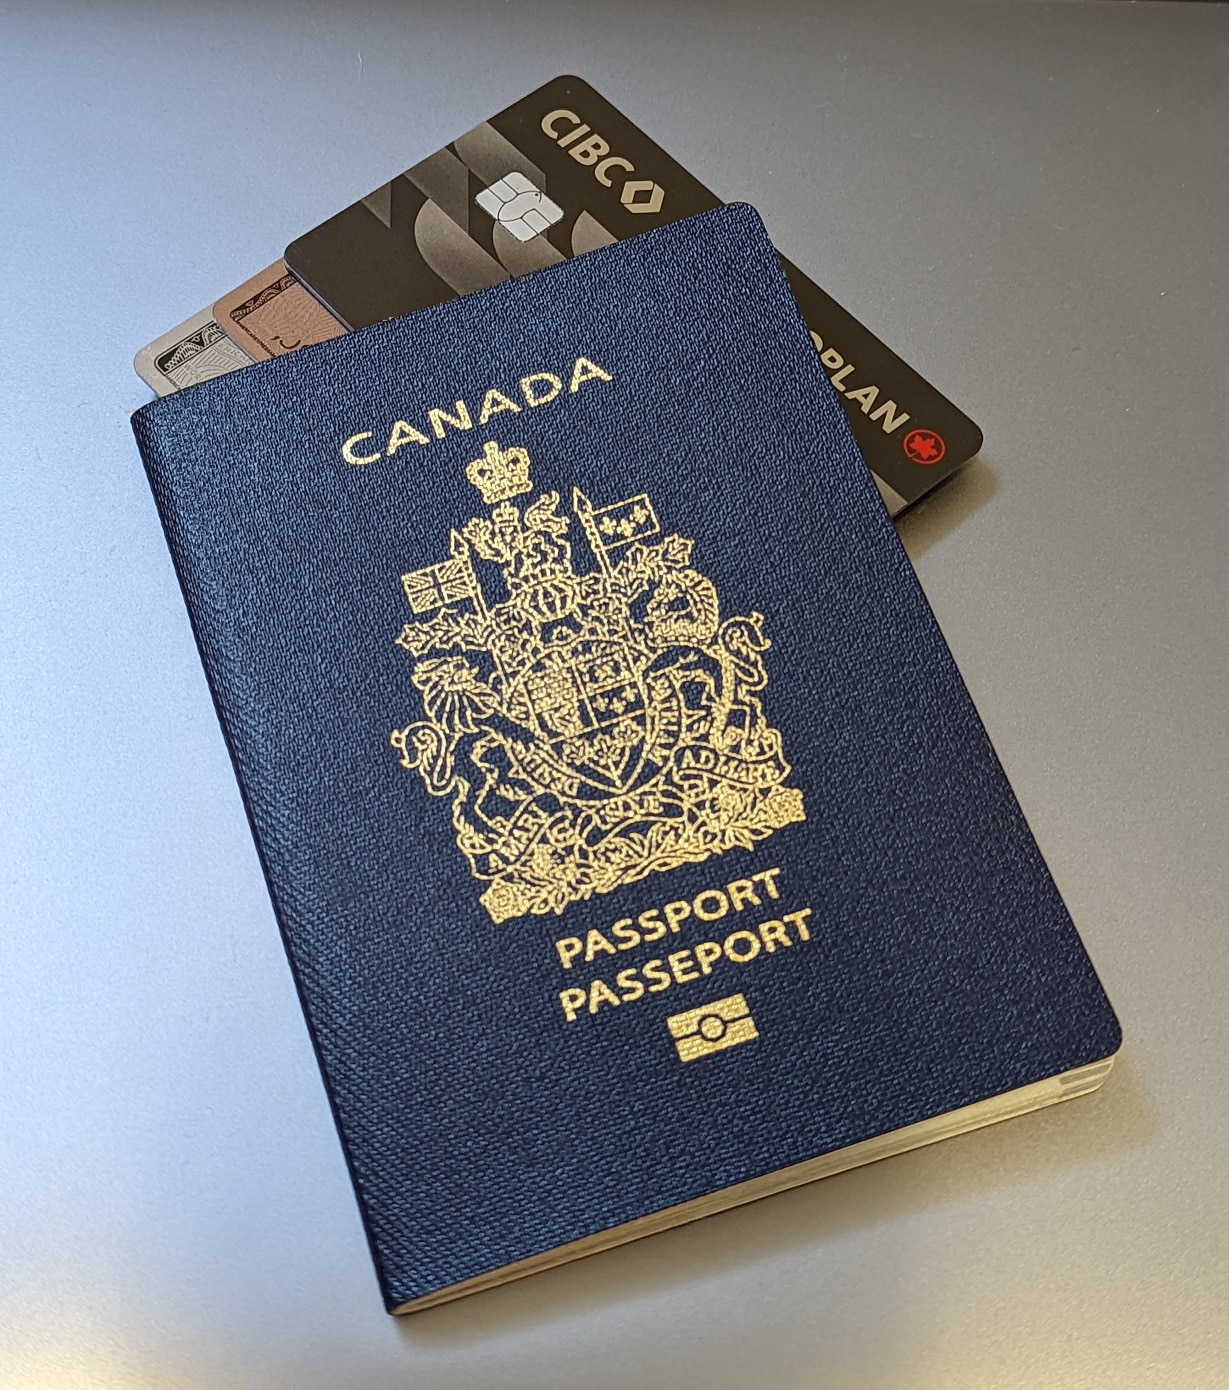 canadian passport with credit cards that offer nexus rebate